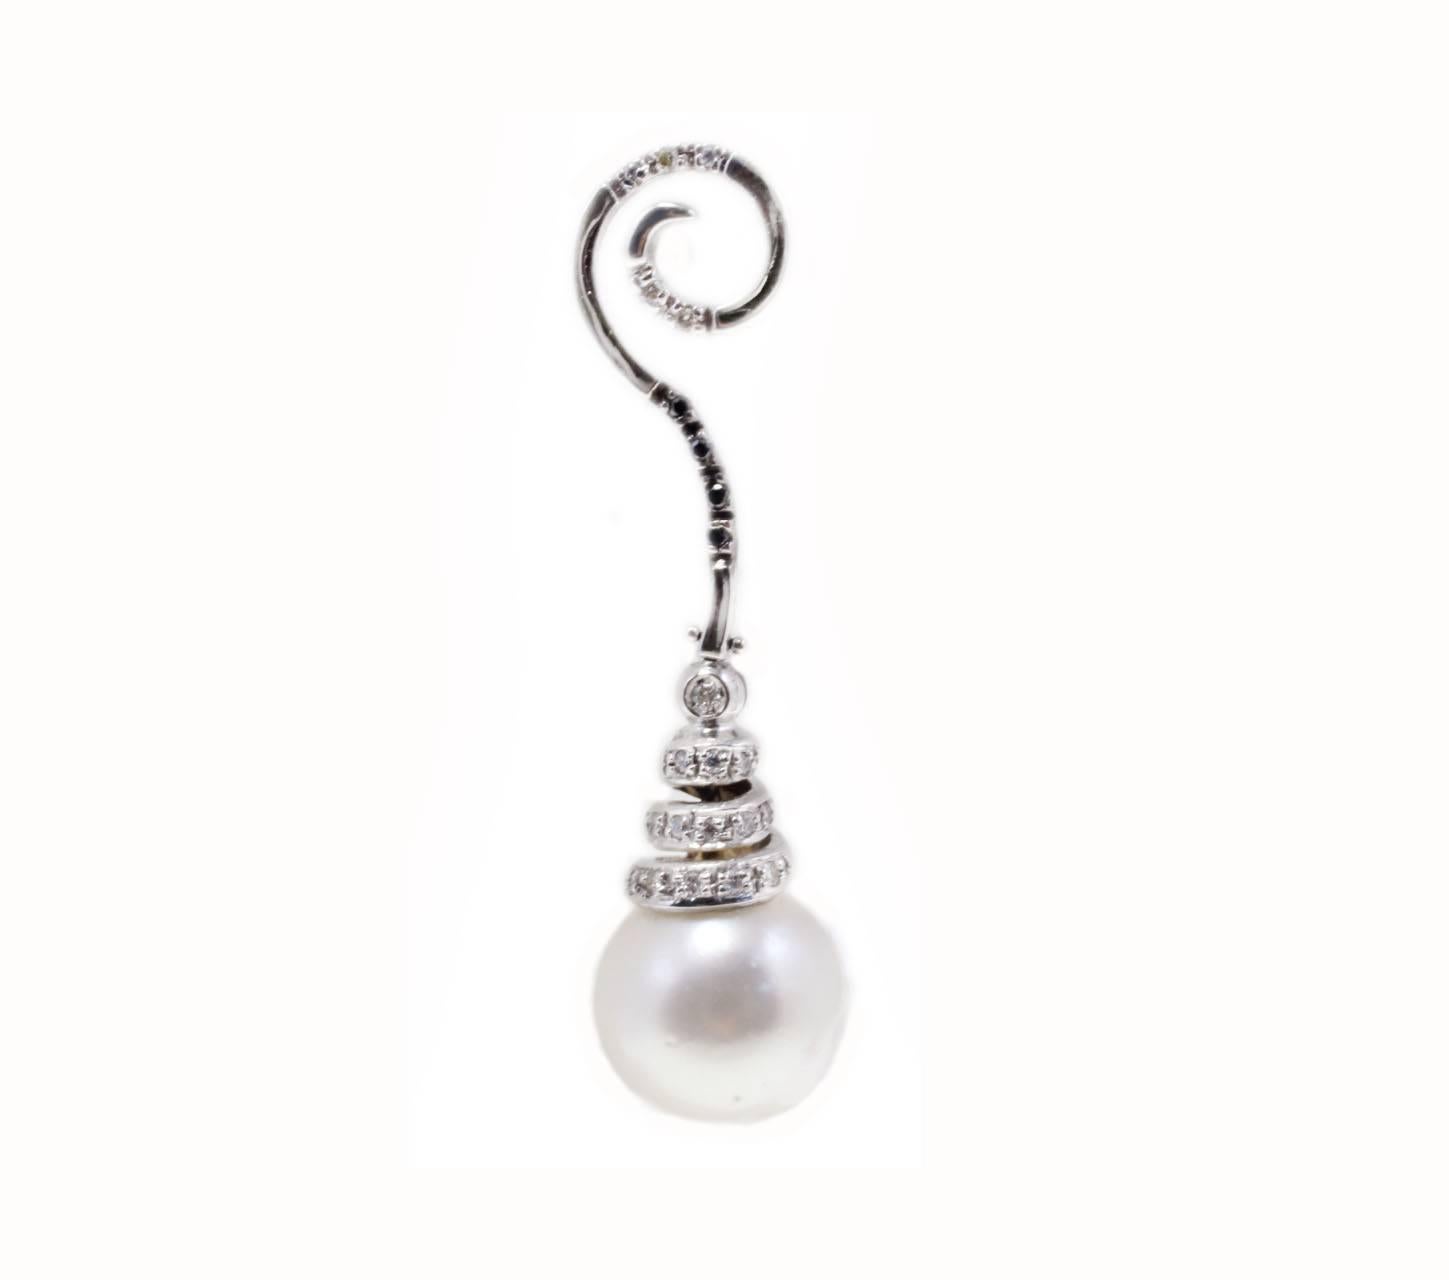 Charming drop earrings composed of single Australian  pearl on the bottom of a spiral design 14K white gold encrusted of diamonds.
Tot weight both earrings 12.2 g, single one 6.1 g
Diamonds 0.47 ct
Pearls 5.90 g, diameter 12/13 mm

Rf. grer